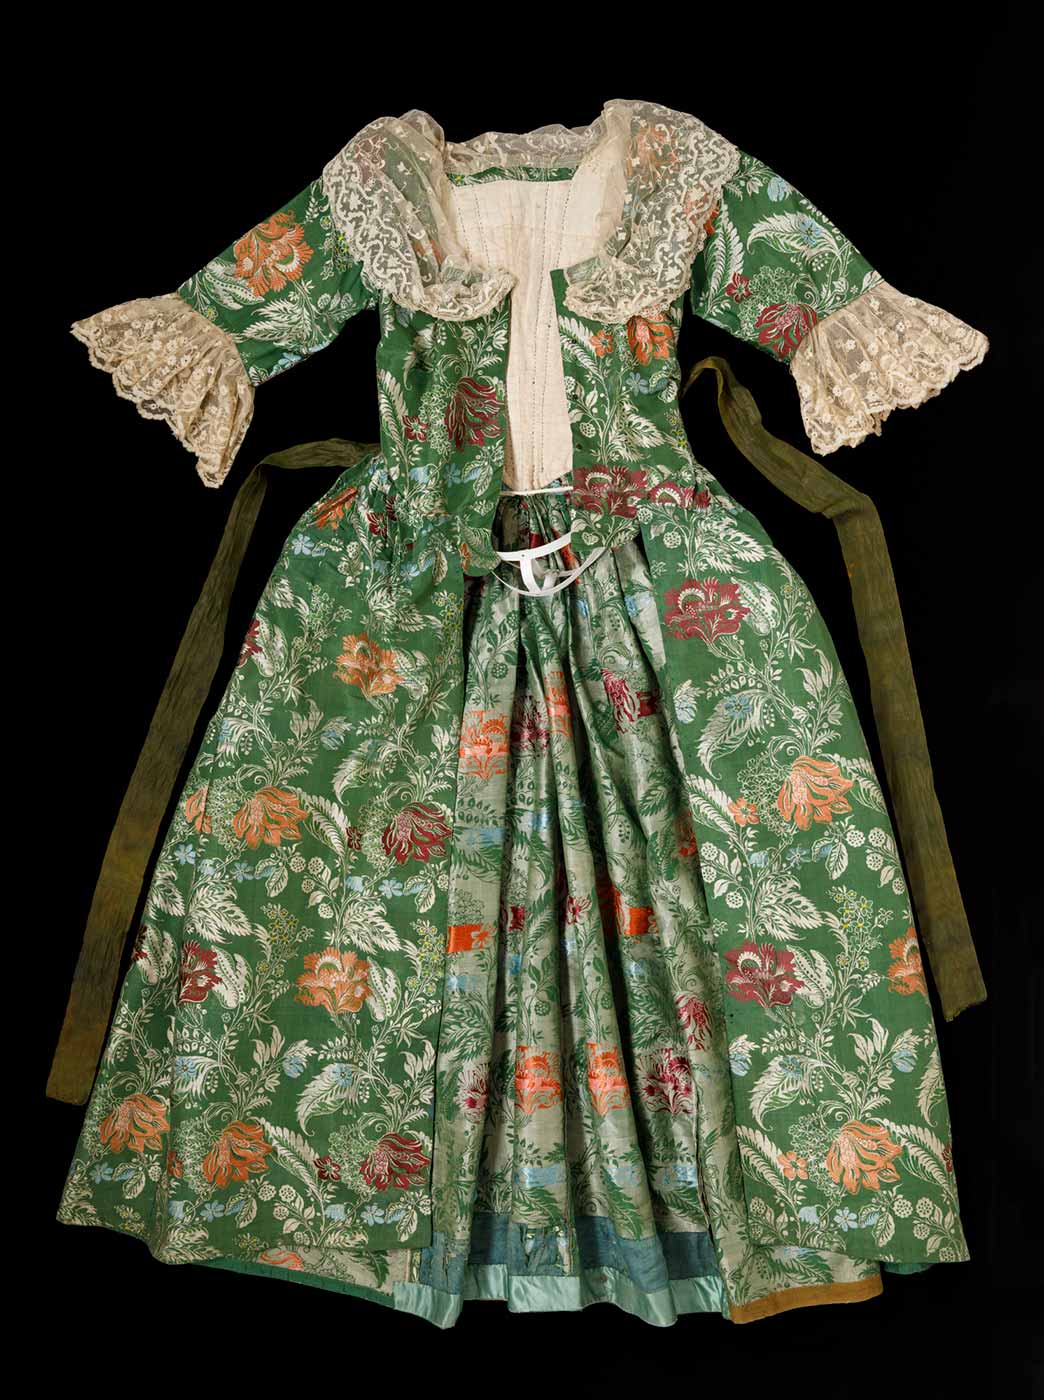 The front of a green and floral dress with lace trim on the sleeves and collar with a long green sash like belt stitched at the waist. - click to view larger image